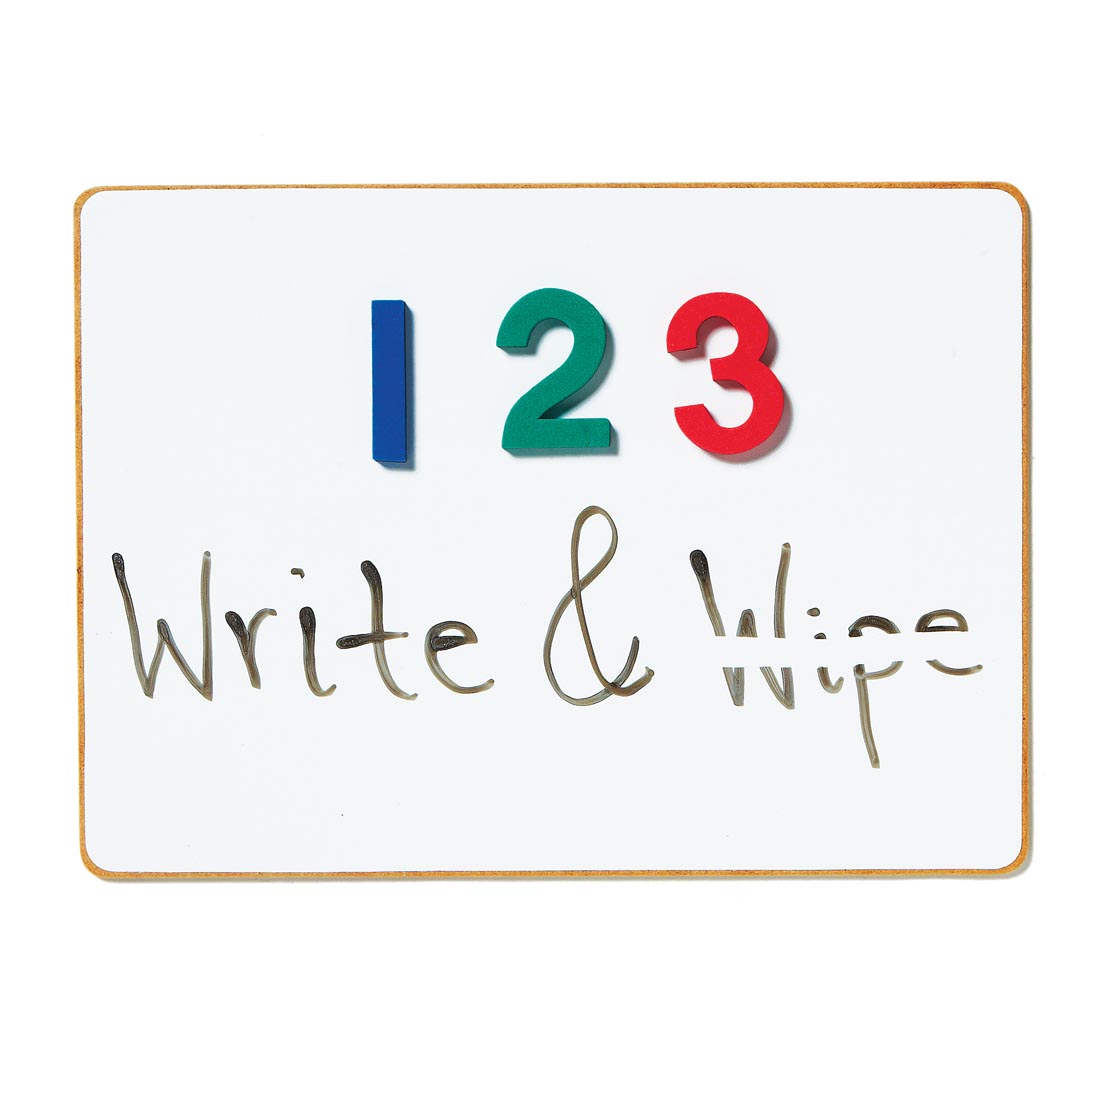 Double-Sided Magnetic Dry Erase Board By Dowling Magnets with the magnetic numbers 1, 2, & 3 plus Write & Wipe written in marker